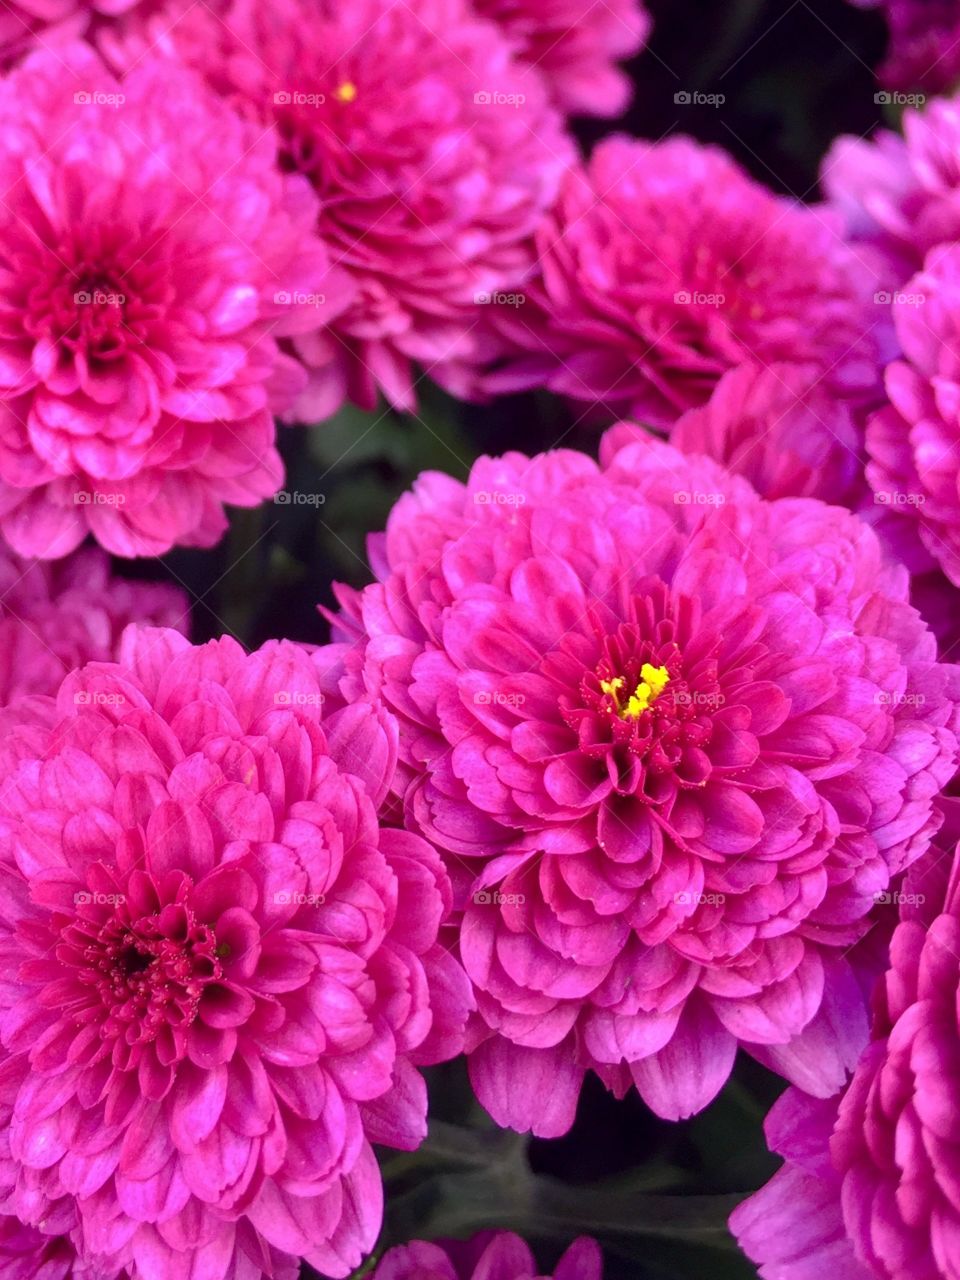 My favorite part of my neighborhood? The local market that sells not only produce, but some of the prettiest flowers around. 